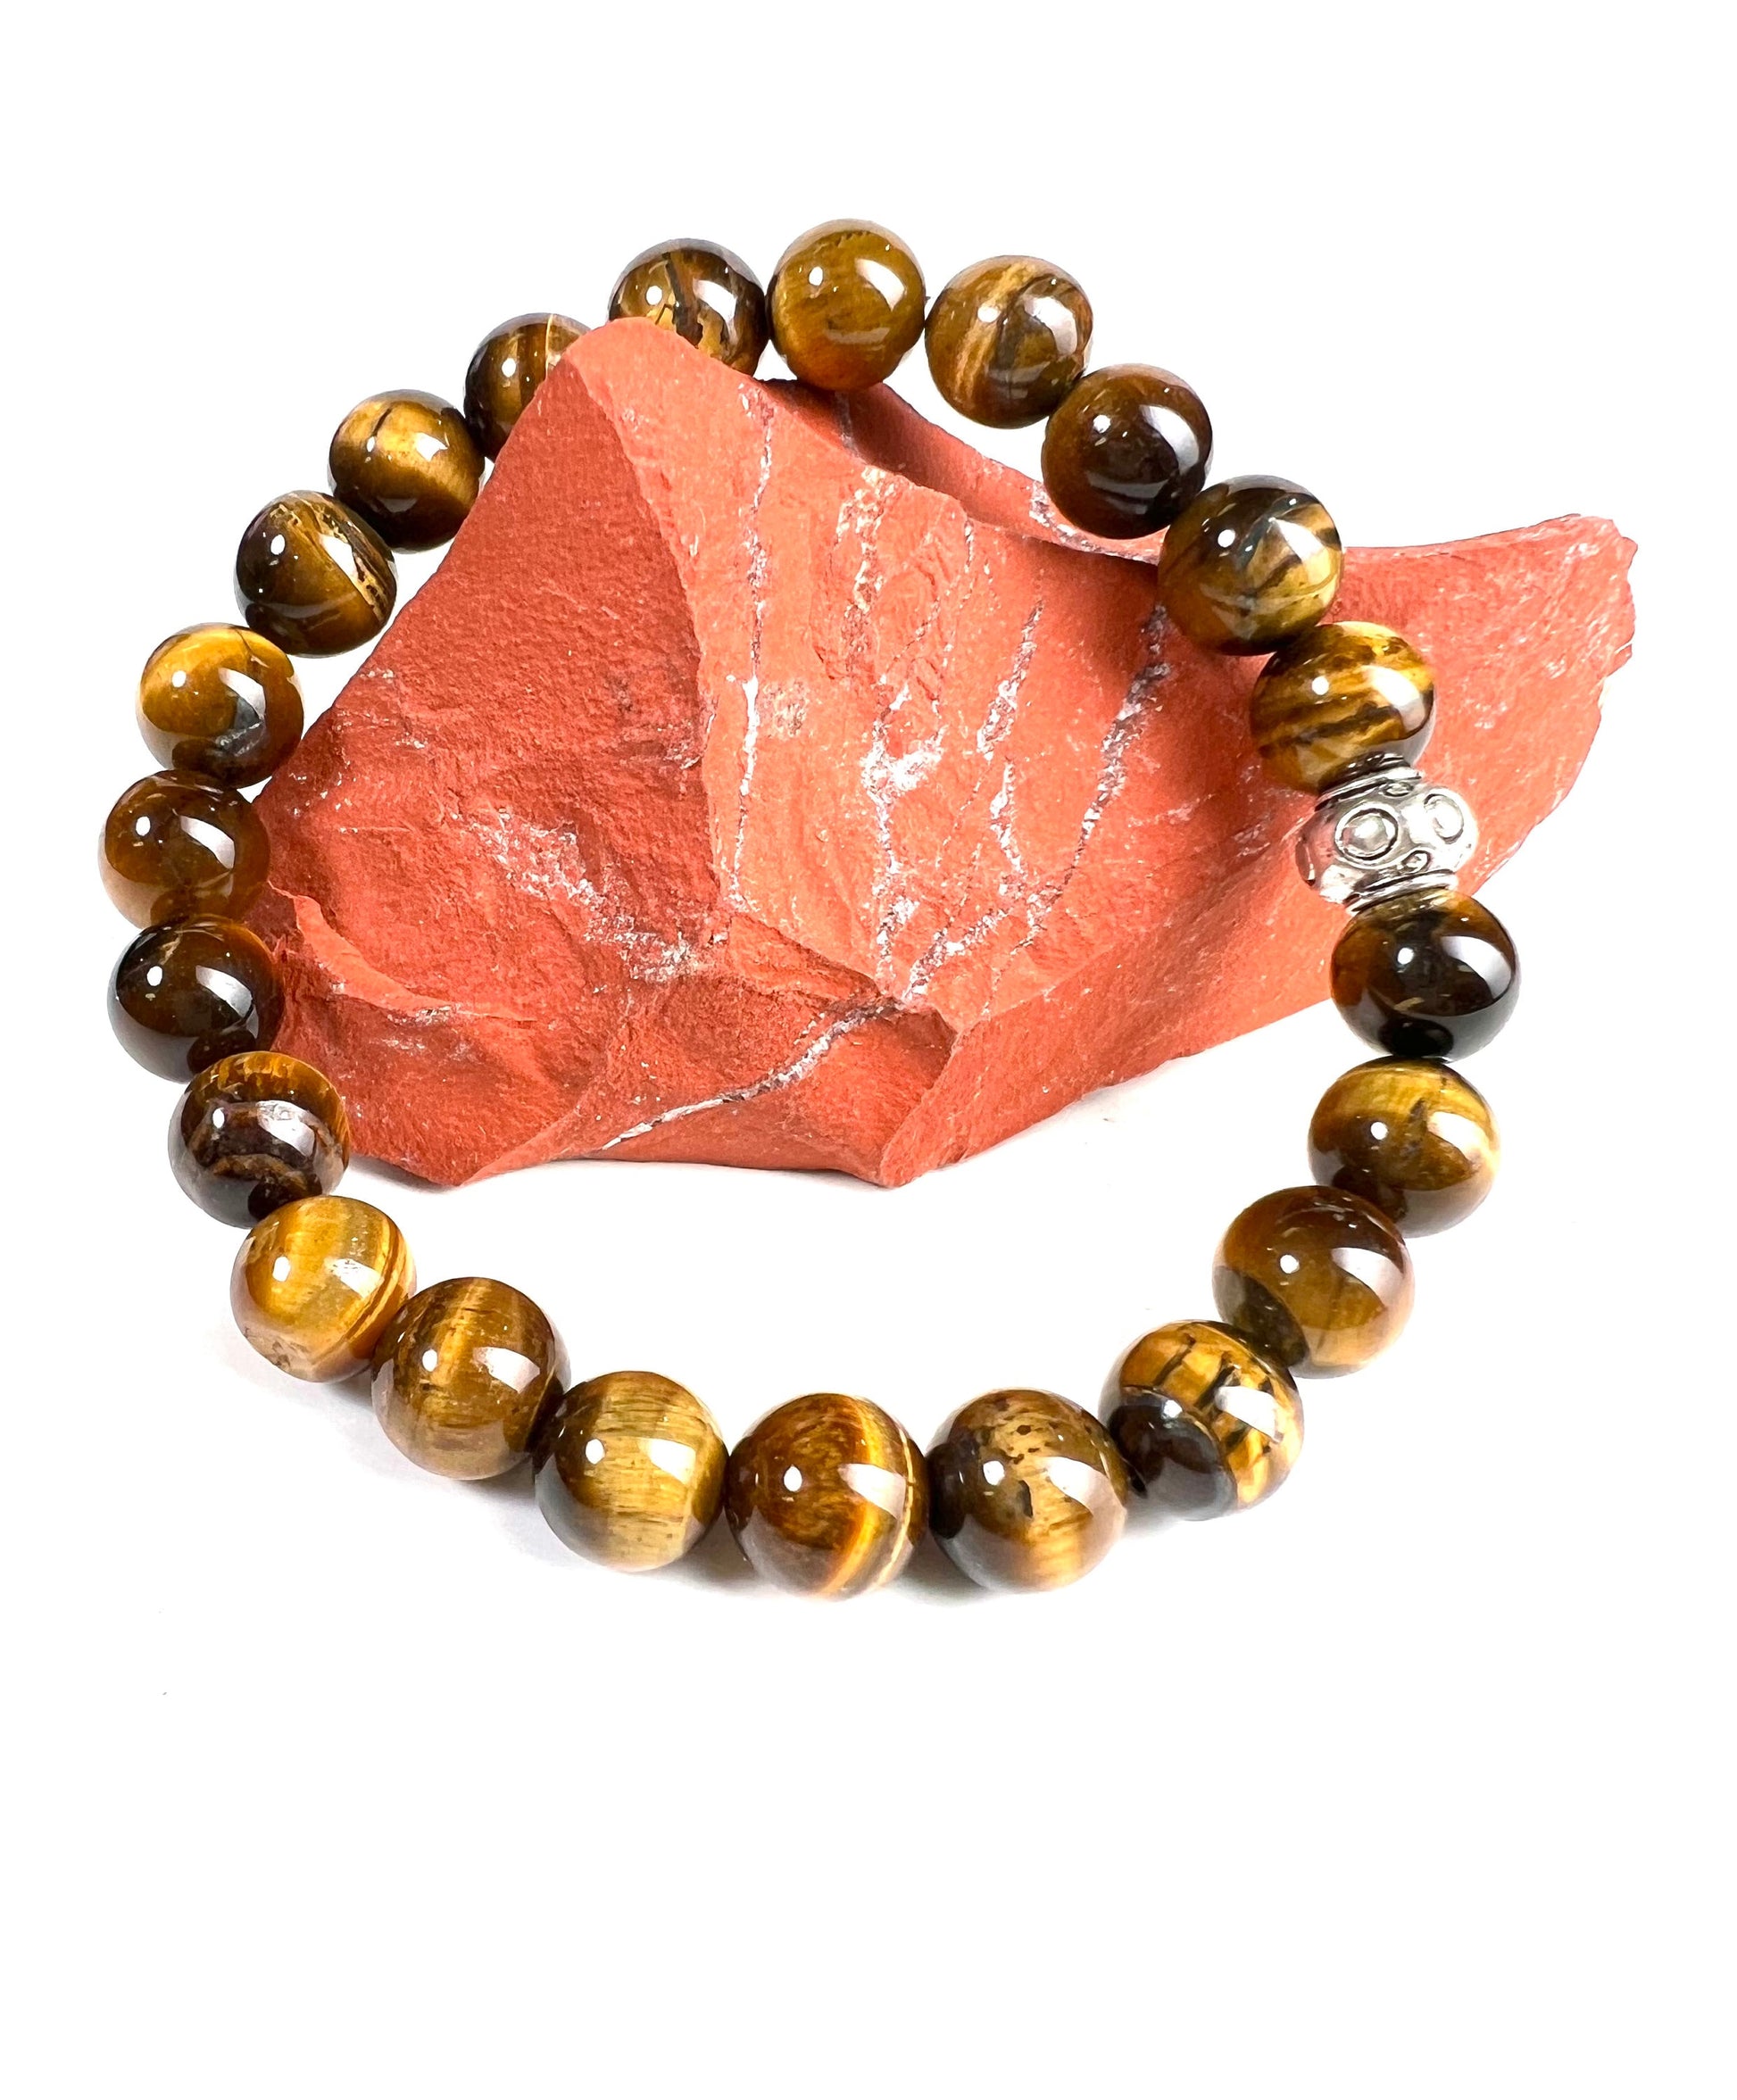 Tiger Eye smooth 8mm natural Gemstone Stretchy Bracelet. Strength and power healing crystal